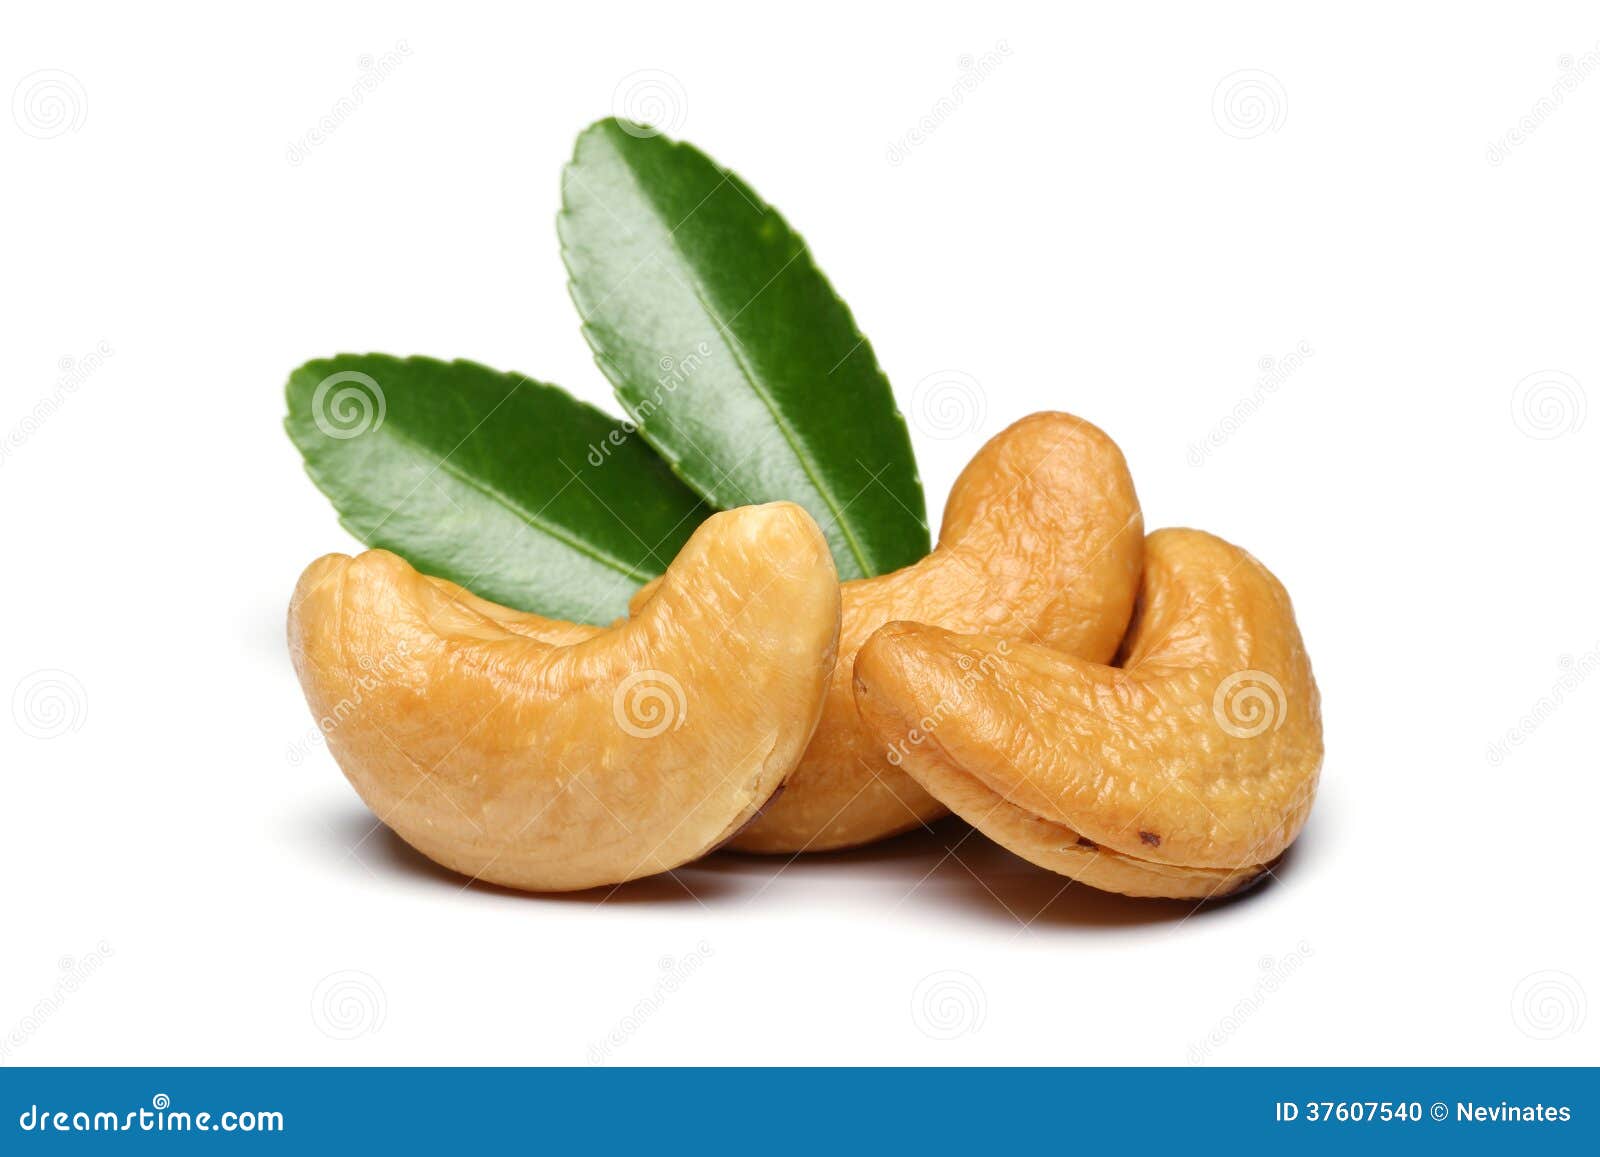 cashews and leaves